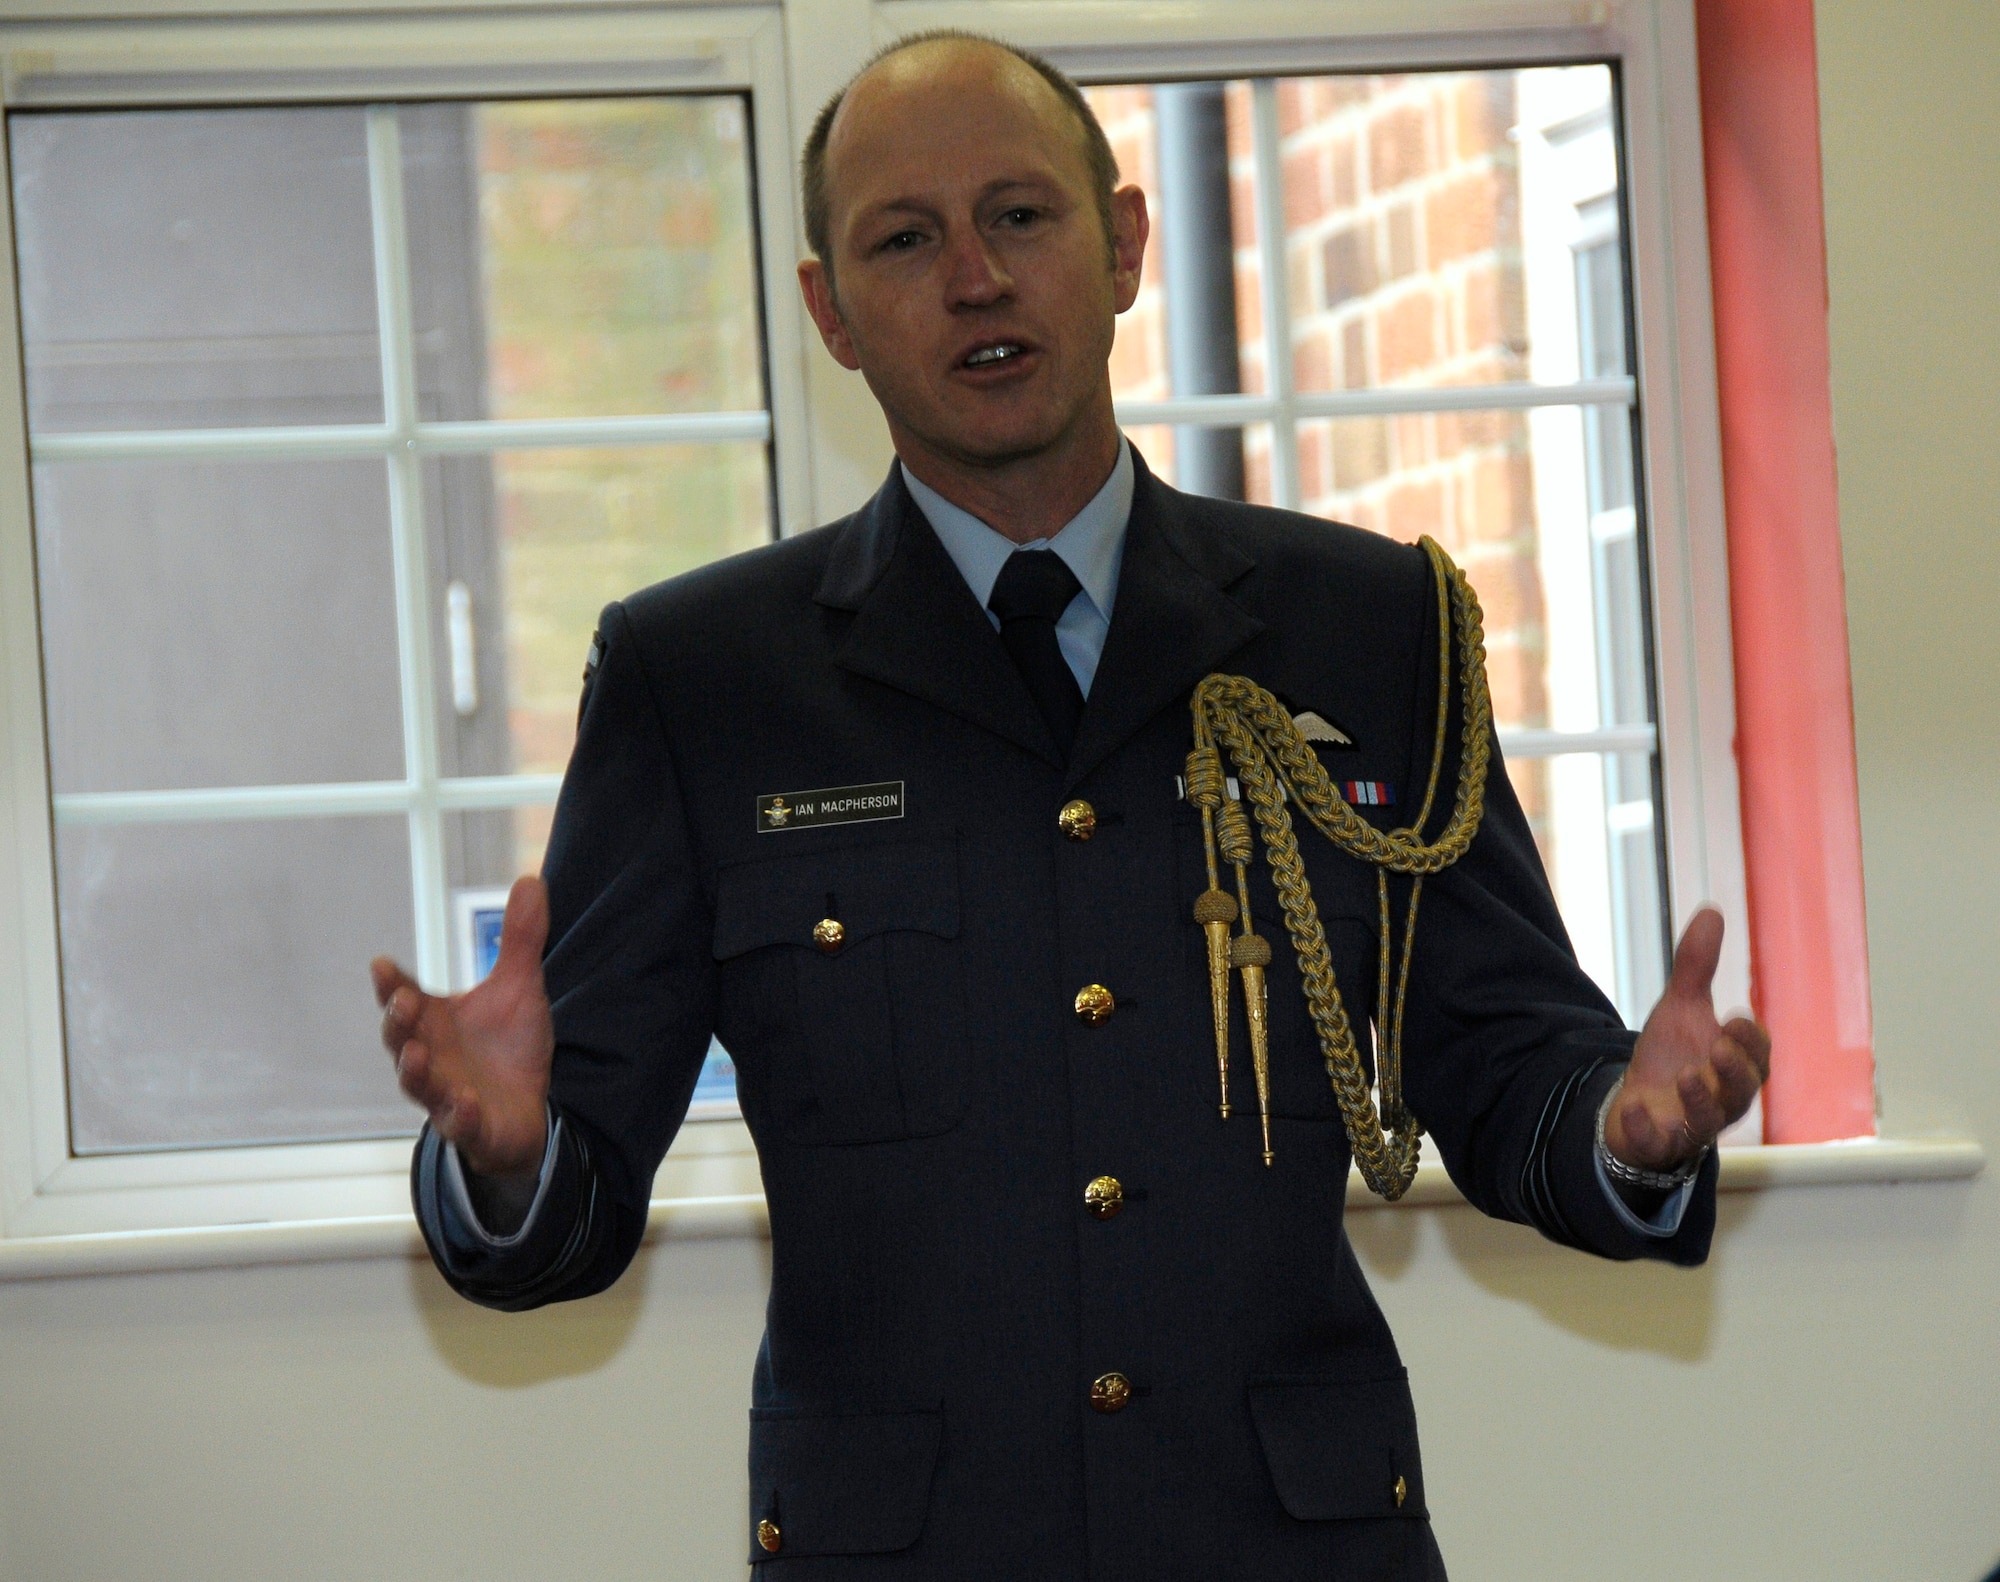 ROYAL AIR FORCE FELTWELL, England -- Guest speaker Wing Commander Ian MacPherson, Air Advisor-Defence Staff, Royal New Zealand Air Force, London, speaks during the dedication ceremony of the newly renamed Ward Community Activity Center on May 14, 2011. The building was named in honor of Sgt. James A. Ward, the first New Zealander awarded the Victoria Cross; the British equivalent of the Medal of Honor. Sergeant Ward was stationed at RAF Feltwell with the Royal New Zealand Air Force No. 75 Squadron during World War II. He was awarded the medal for his heroic actions on July 7, 1941, when his Wellington bomber caught fire from an enemy attack. (U.S. Air Force photo/Staff Sgt. Connor Estes)